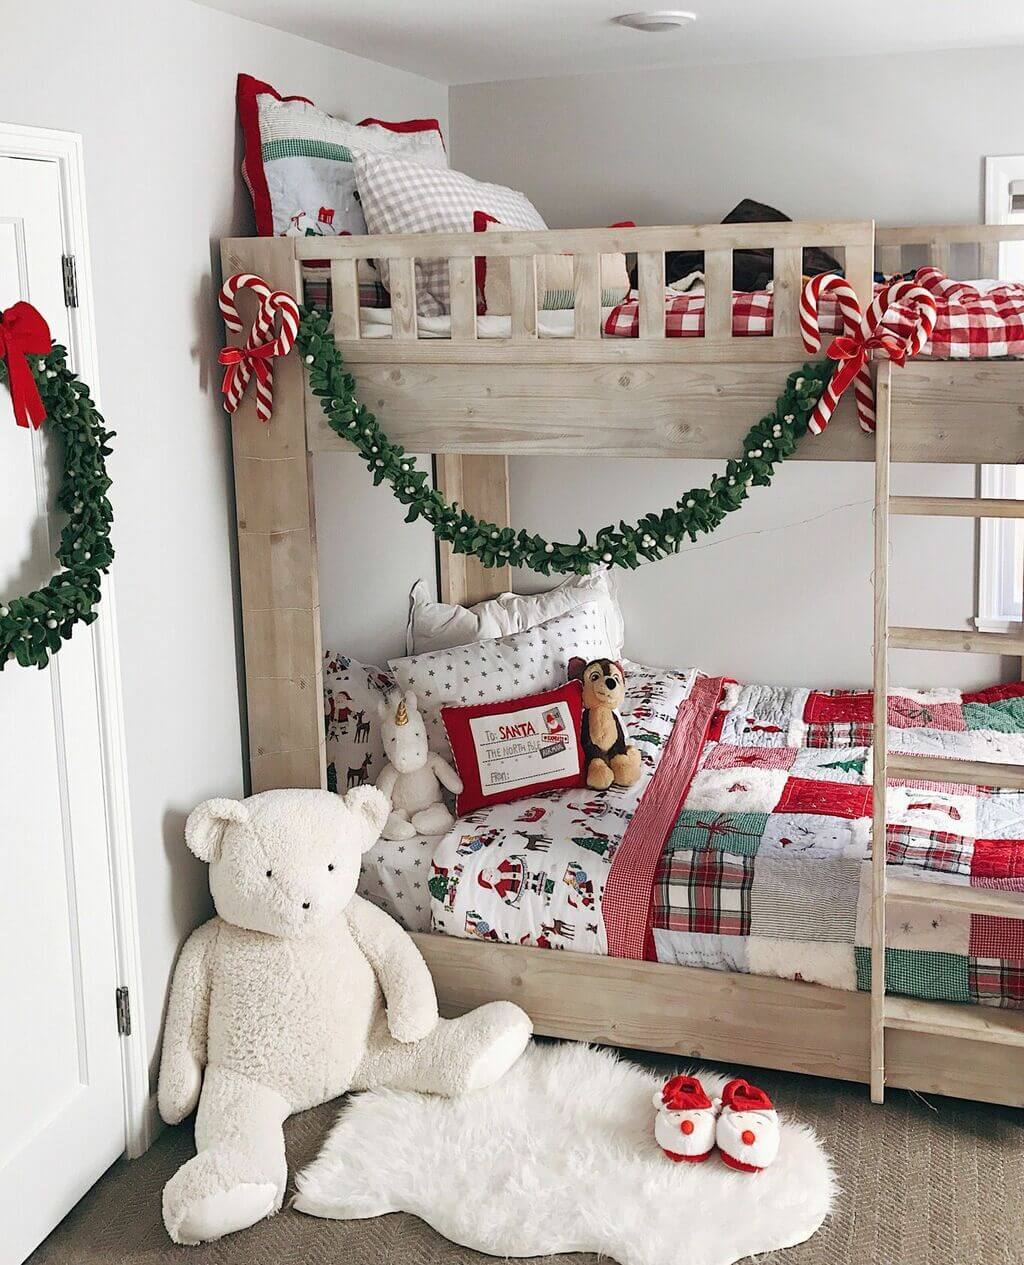 A bedroom with a bunk bed and a teddy bear
